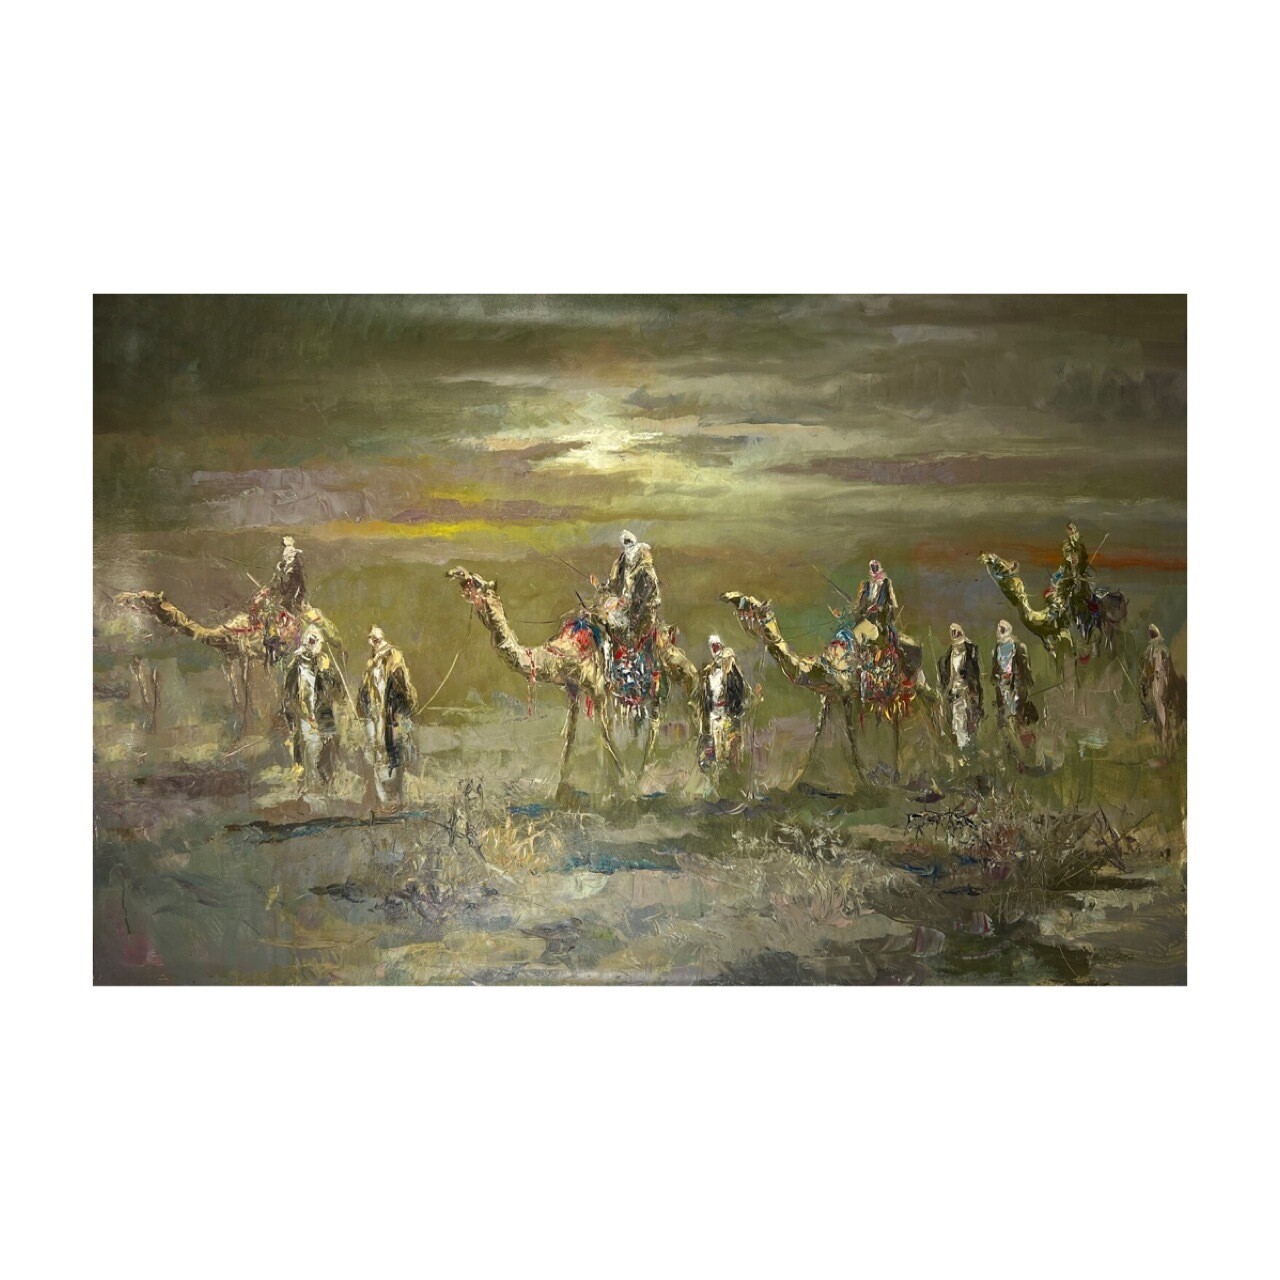 Desert Nomads &amp; Camels Oil painting Original Hand Painted Canvas